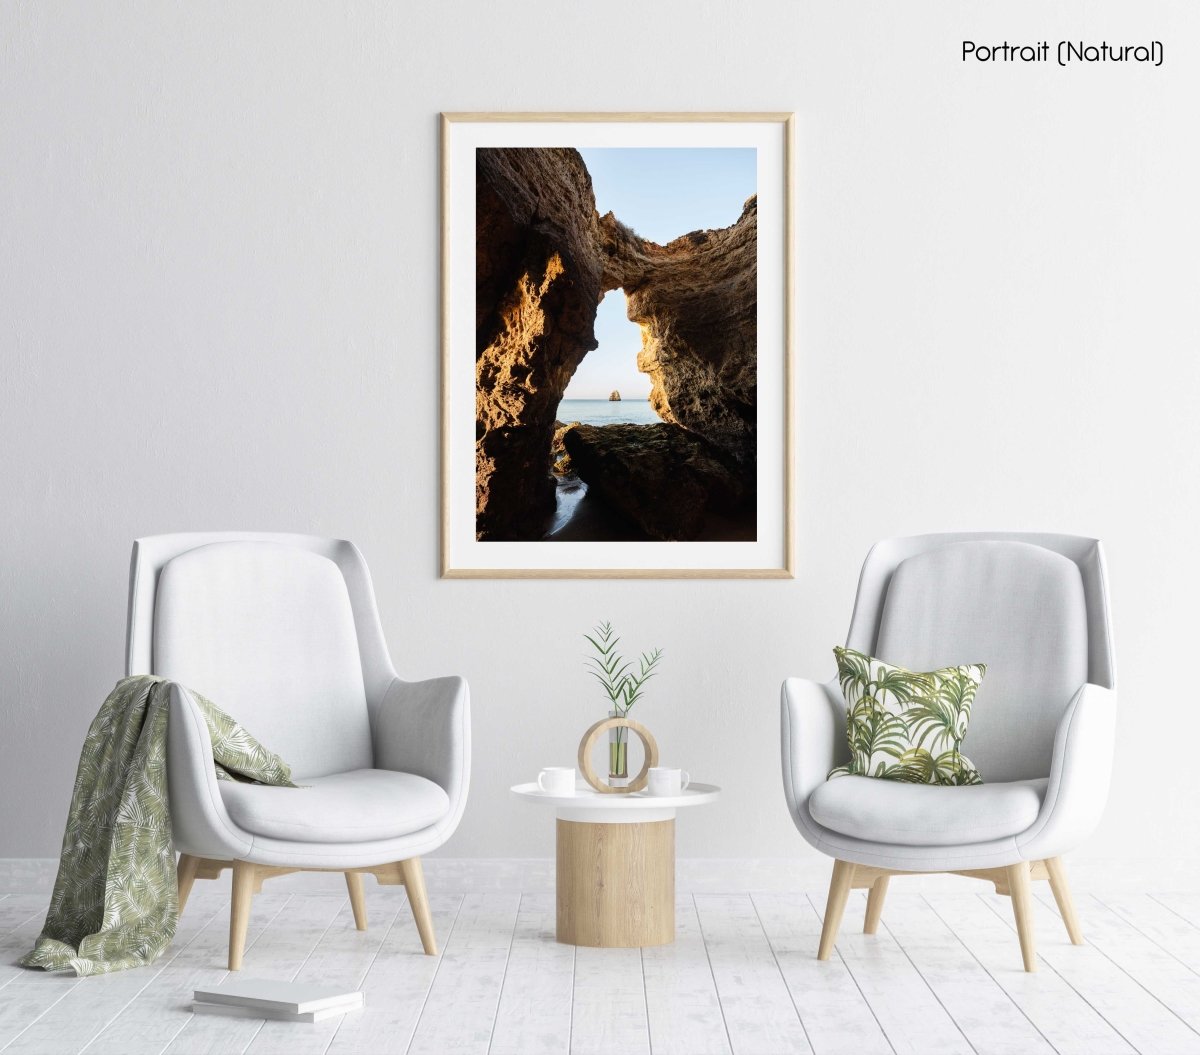 Inside a cave in Lagos looking out to blue sea and rock in a natural fine art frame